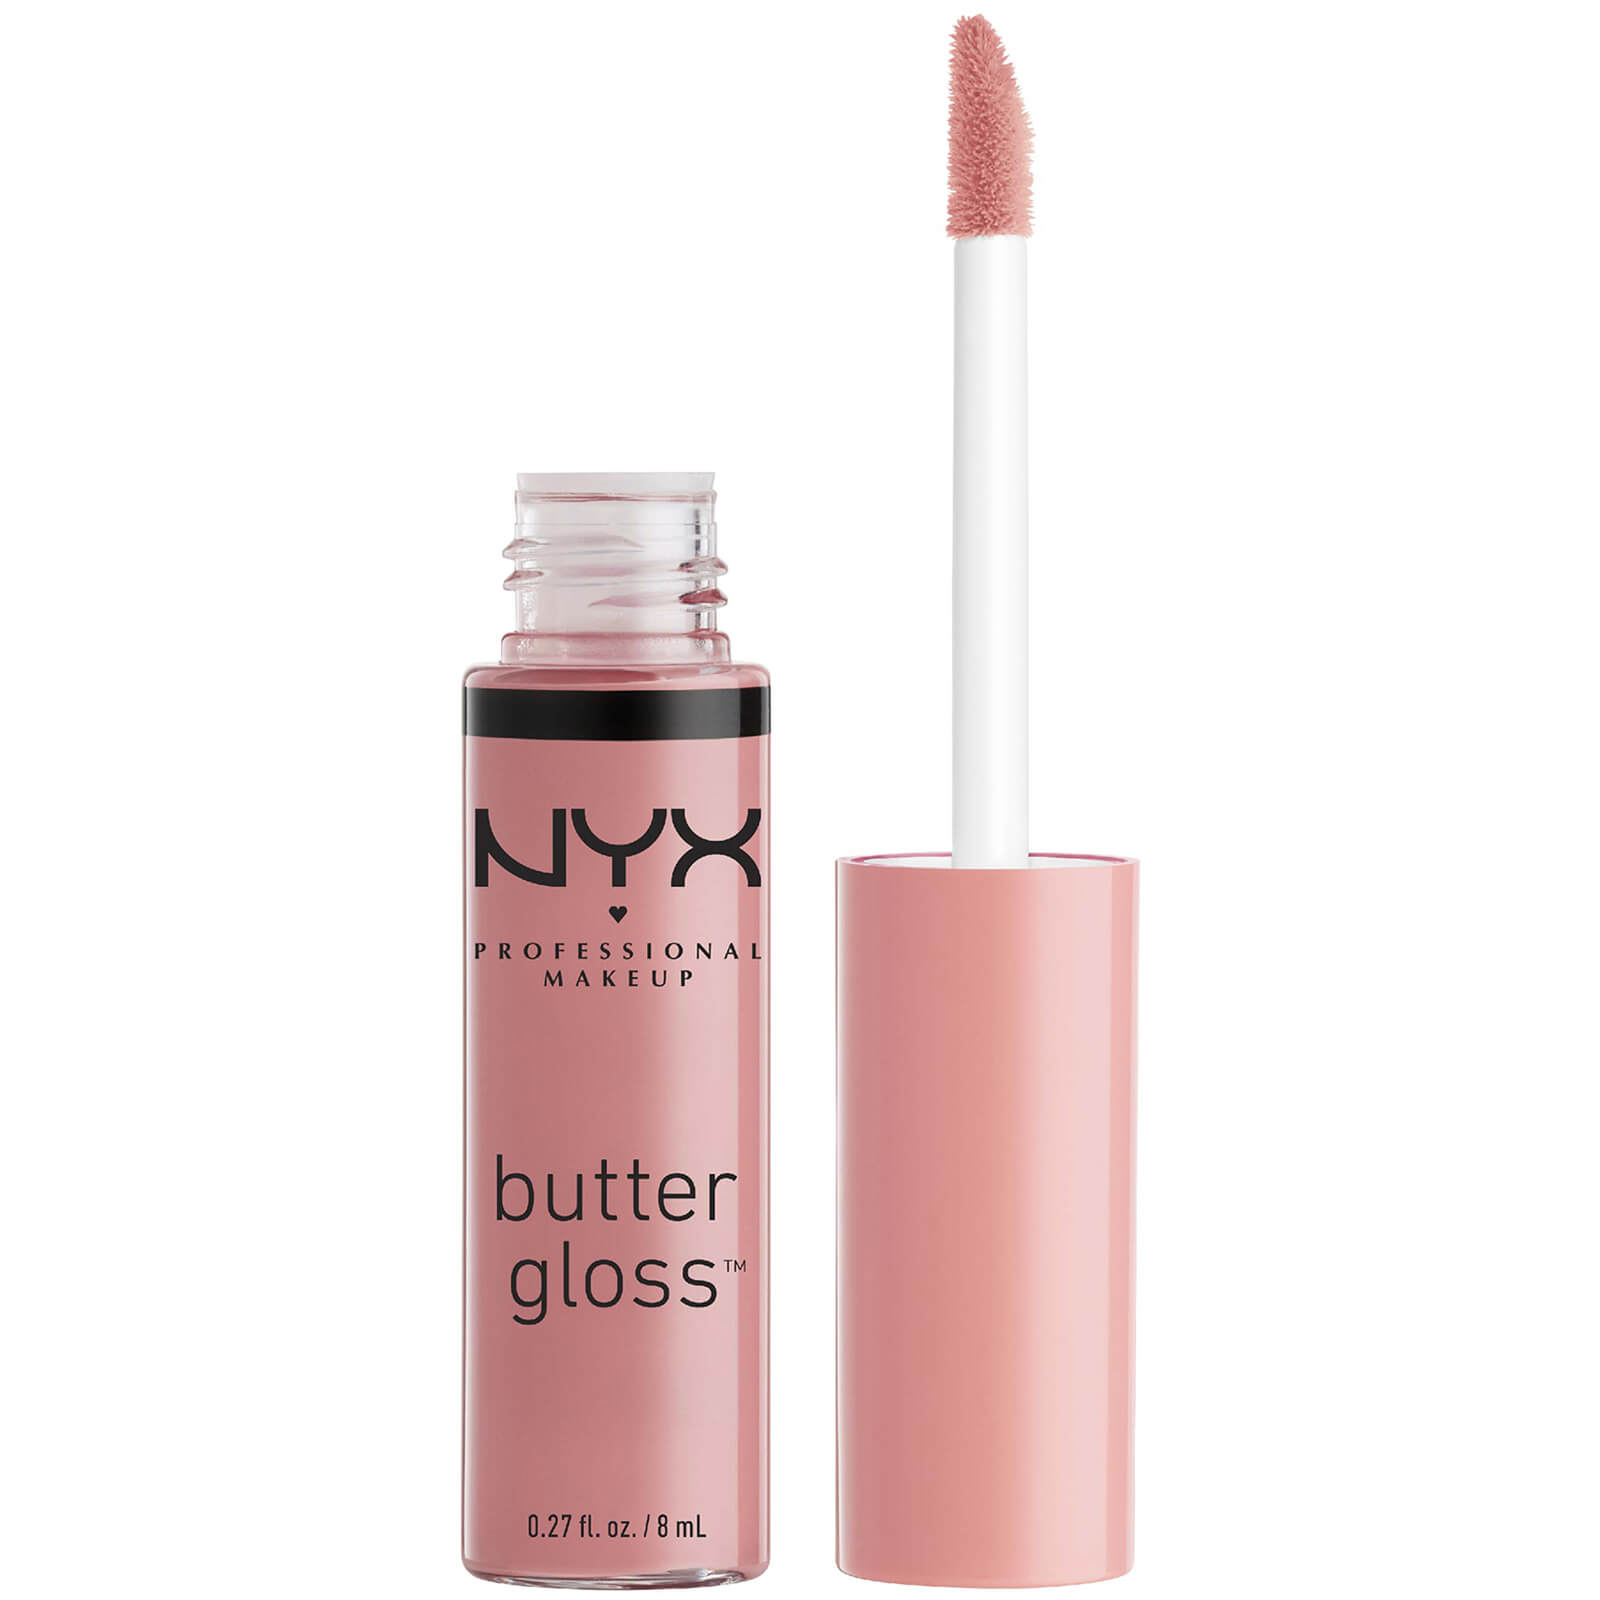 NYX Professional Makeup Butter Gloss (Various Shades) - Creme Brulee